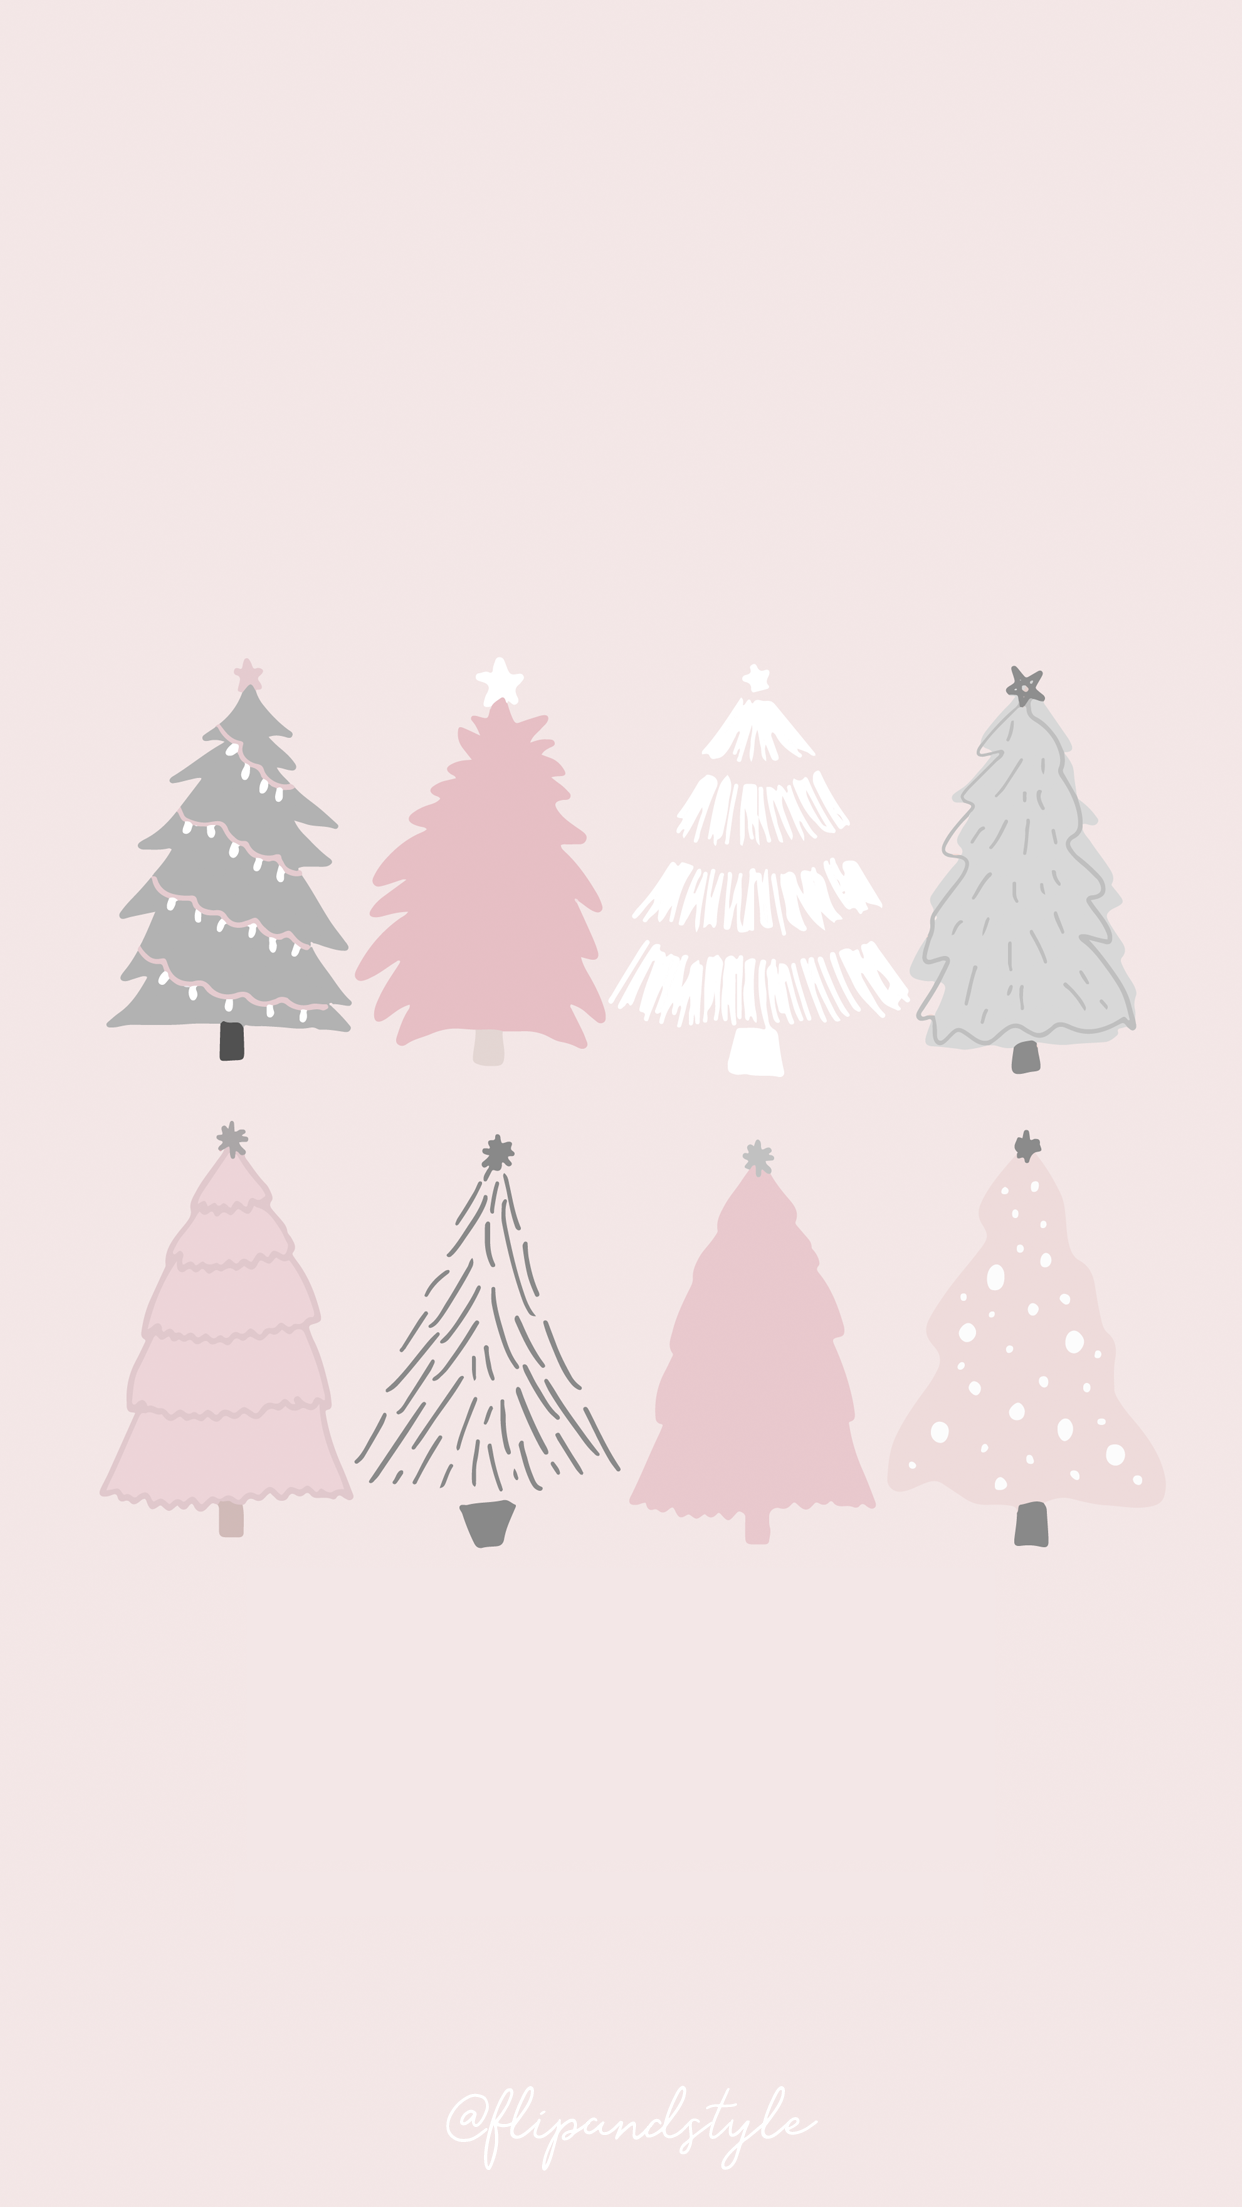 Free Wallpapers Backgrounds Christmas Festive by Flip And